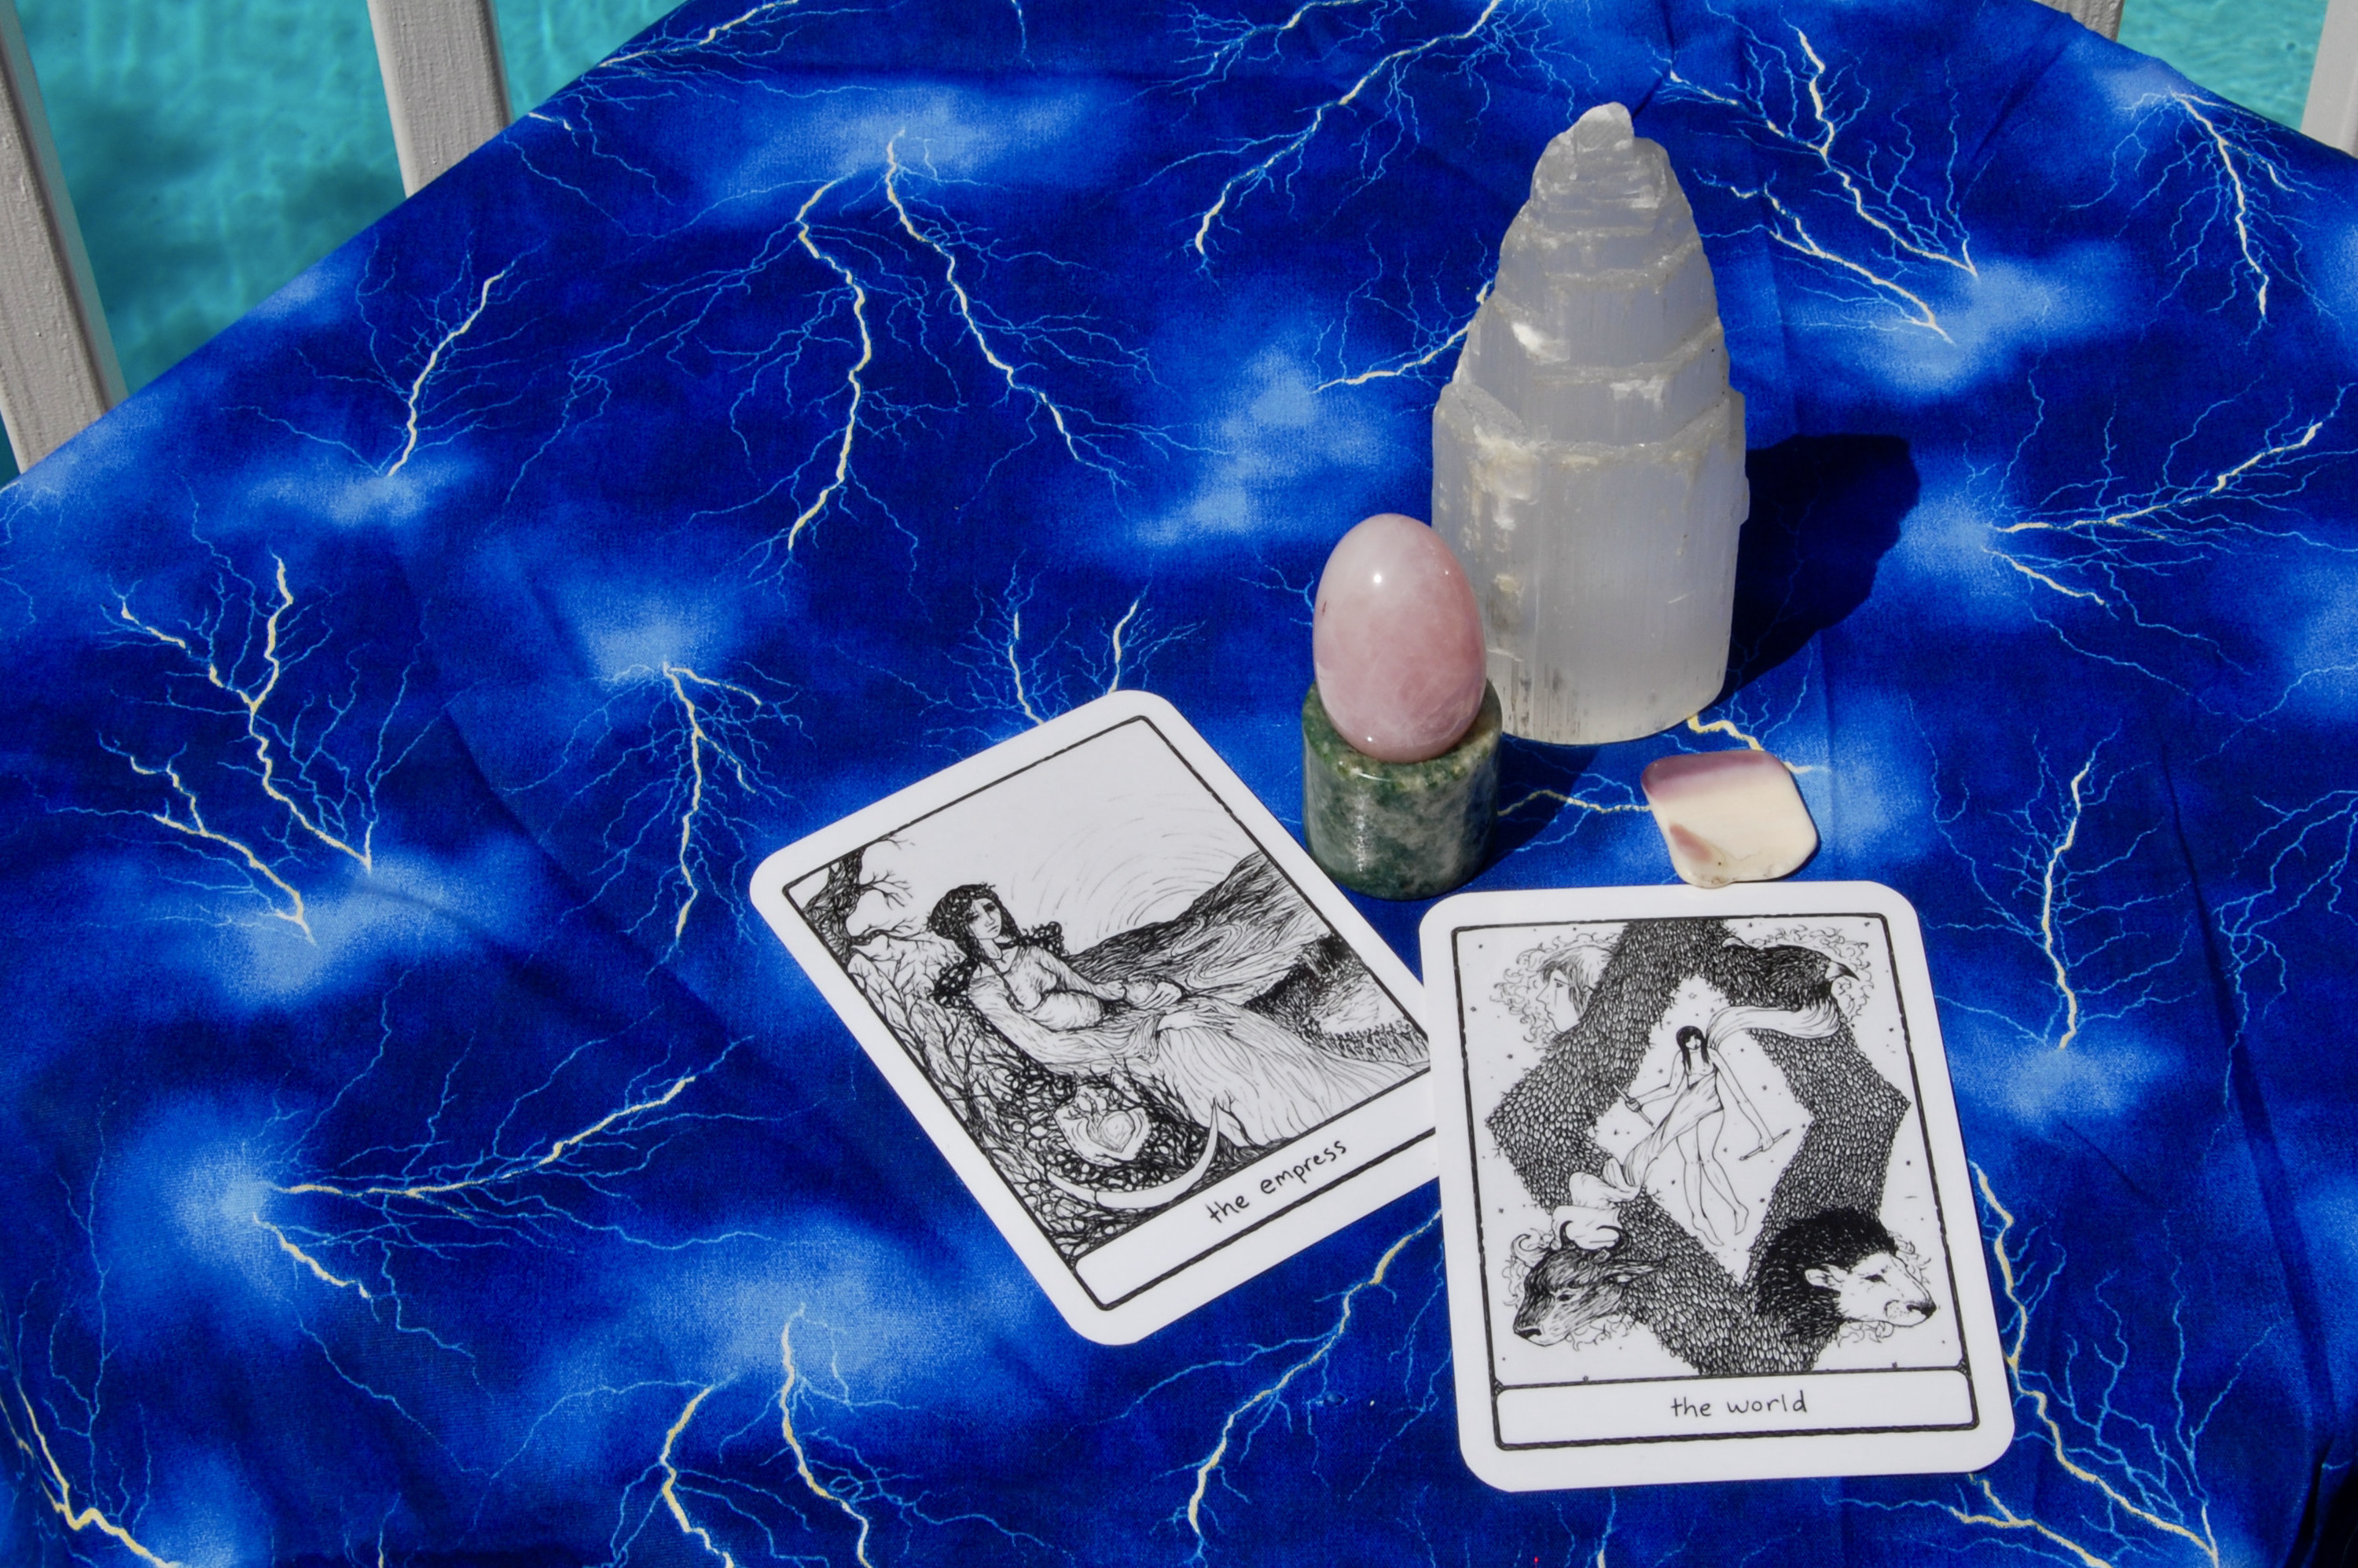 Photo of crystal yoni egg with two tarot cards (Judgement and the High Priestess), plus a selenite tower and a small, square-shaped shell